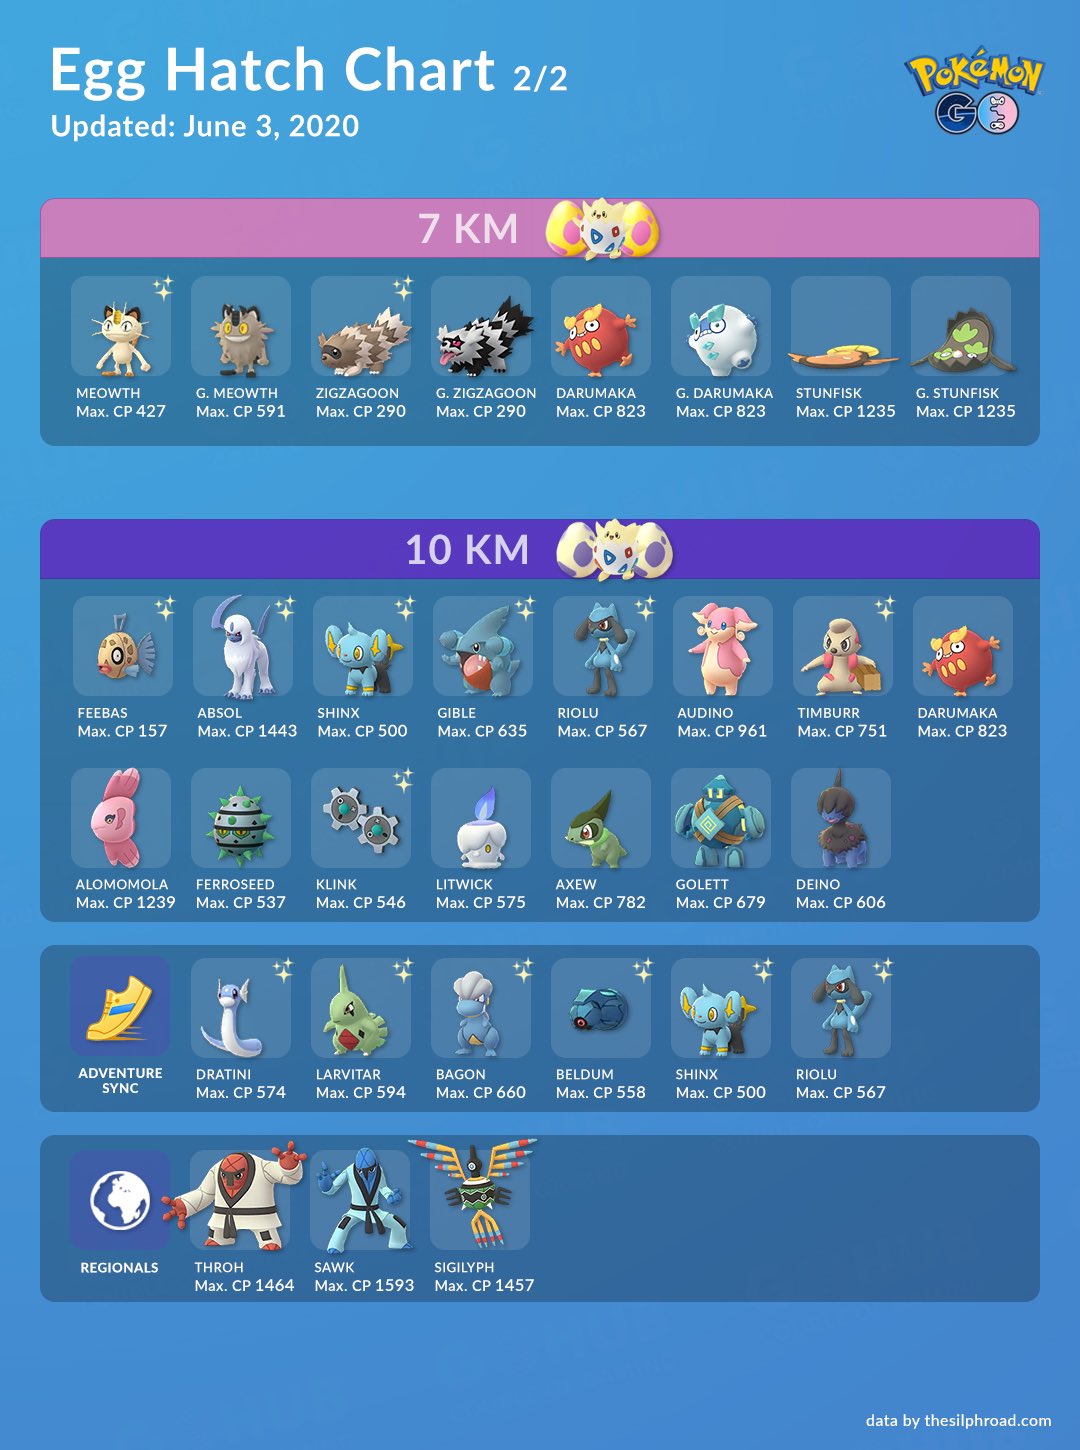 kindben faglært disk Couple of Gaming on Twitter: "A long overdue egg hatch chart update is  finally here 🐣 Are you going for the new #GalarianPokemon hatching from  7km eggs? 🤔 #PokemonGO https://t.co/2EdJtCgzrH" / Twitter